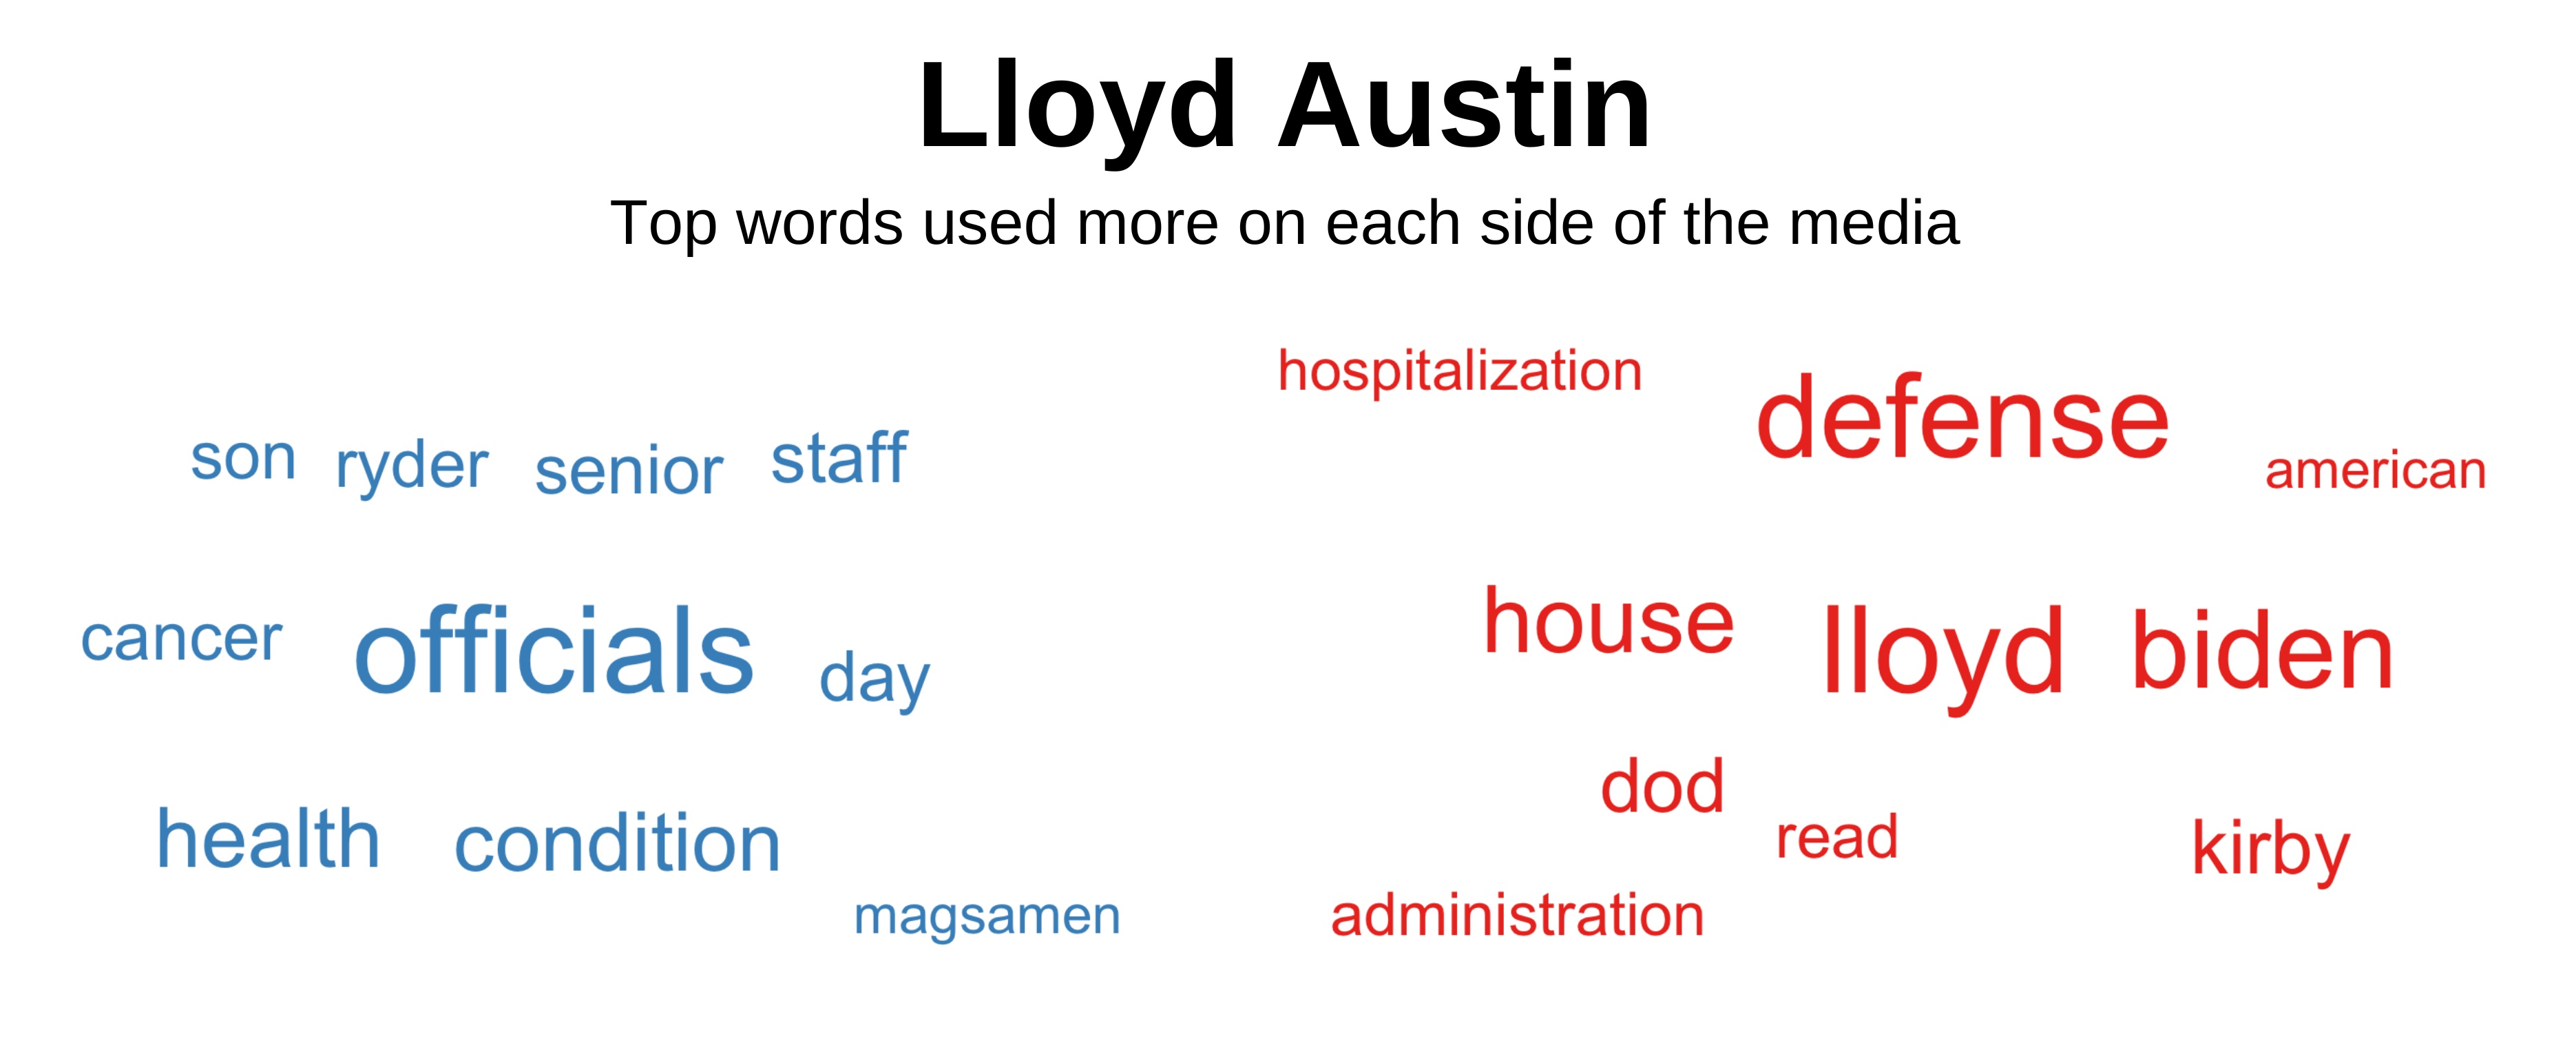 Top words about Lloyd Austin used more on each side of the media.